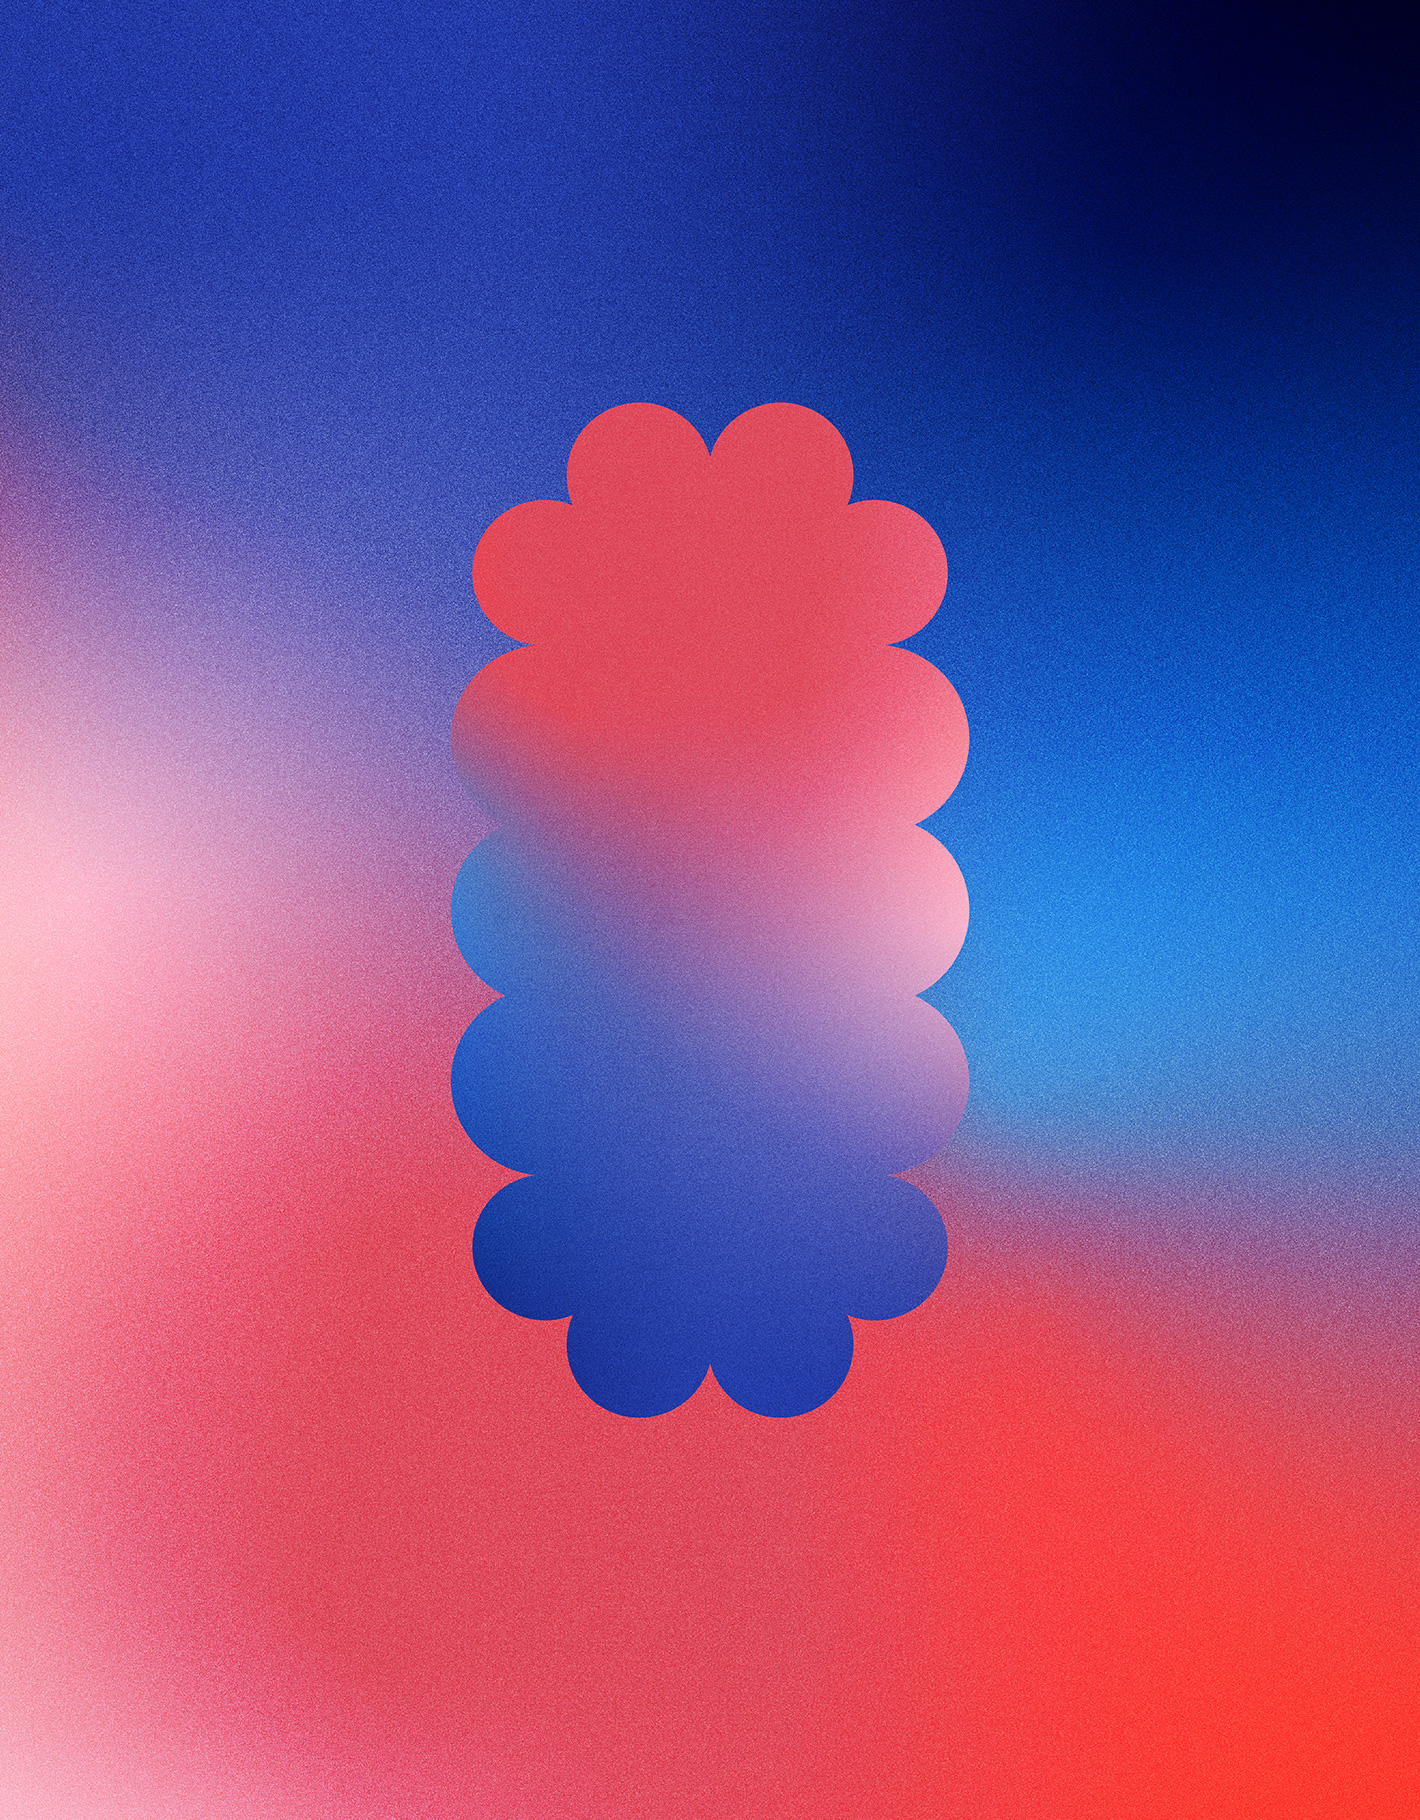 Brand identity case study image shows a Sarah Stanford support graphic. A blobby shape with a red and blue gradient appears on the same gradient background.